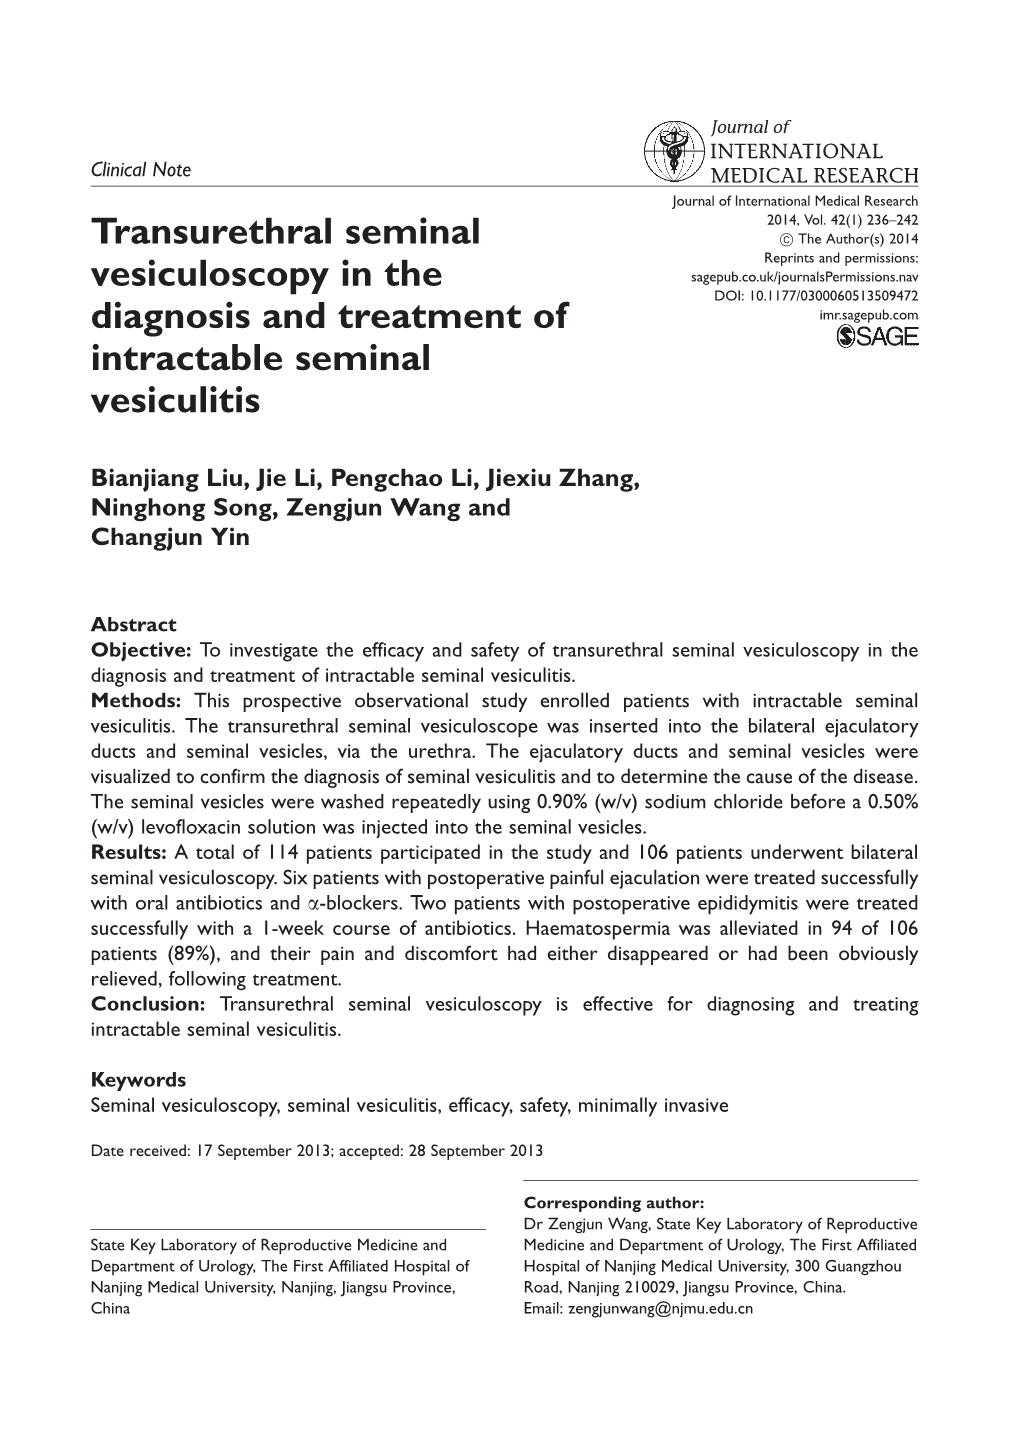 Transurethral Seminal Vesiculoscopy in the Diagnosis and Treatment of Intractable Seminal Vesiculitis